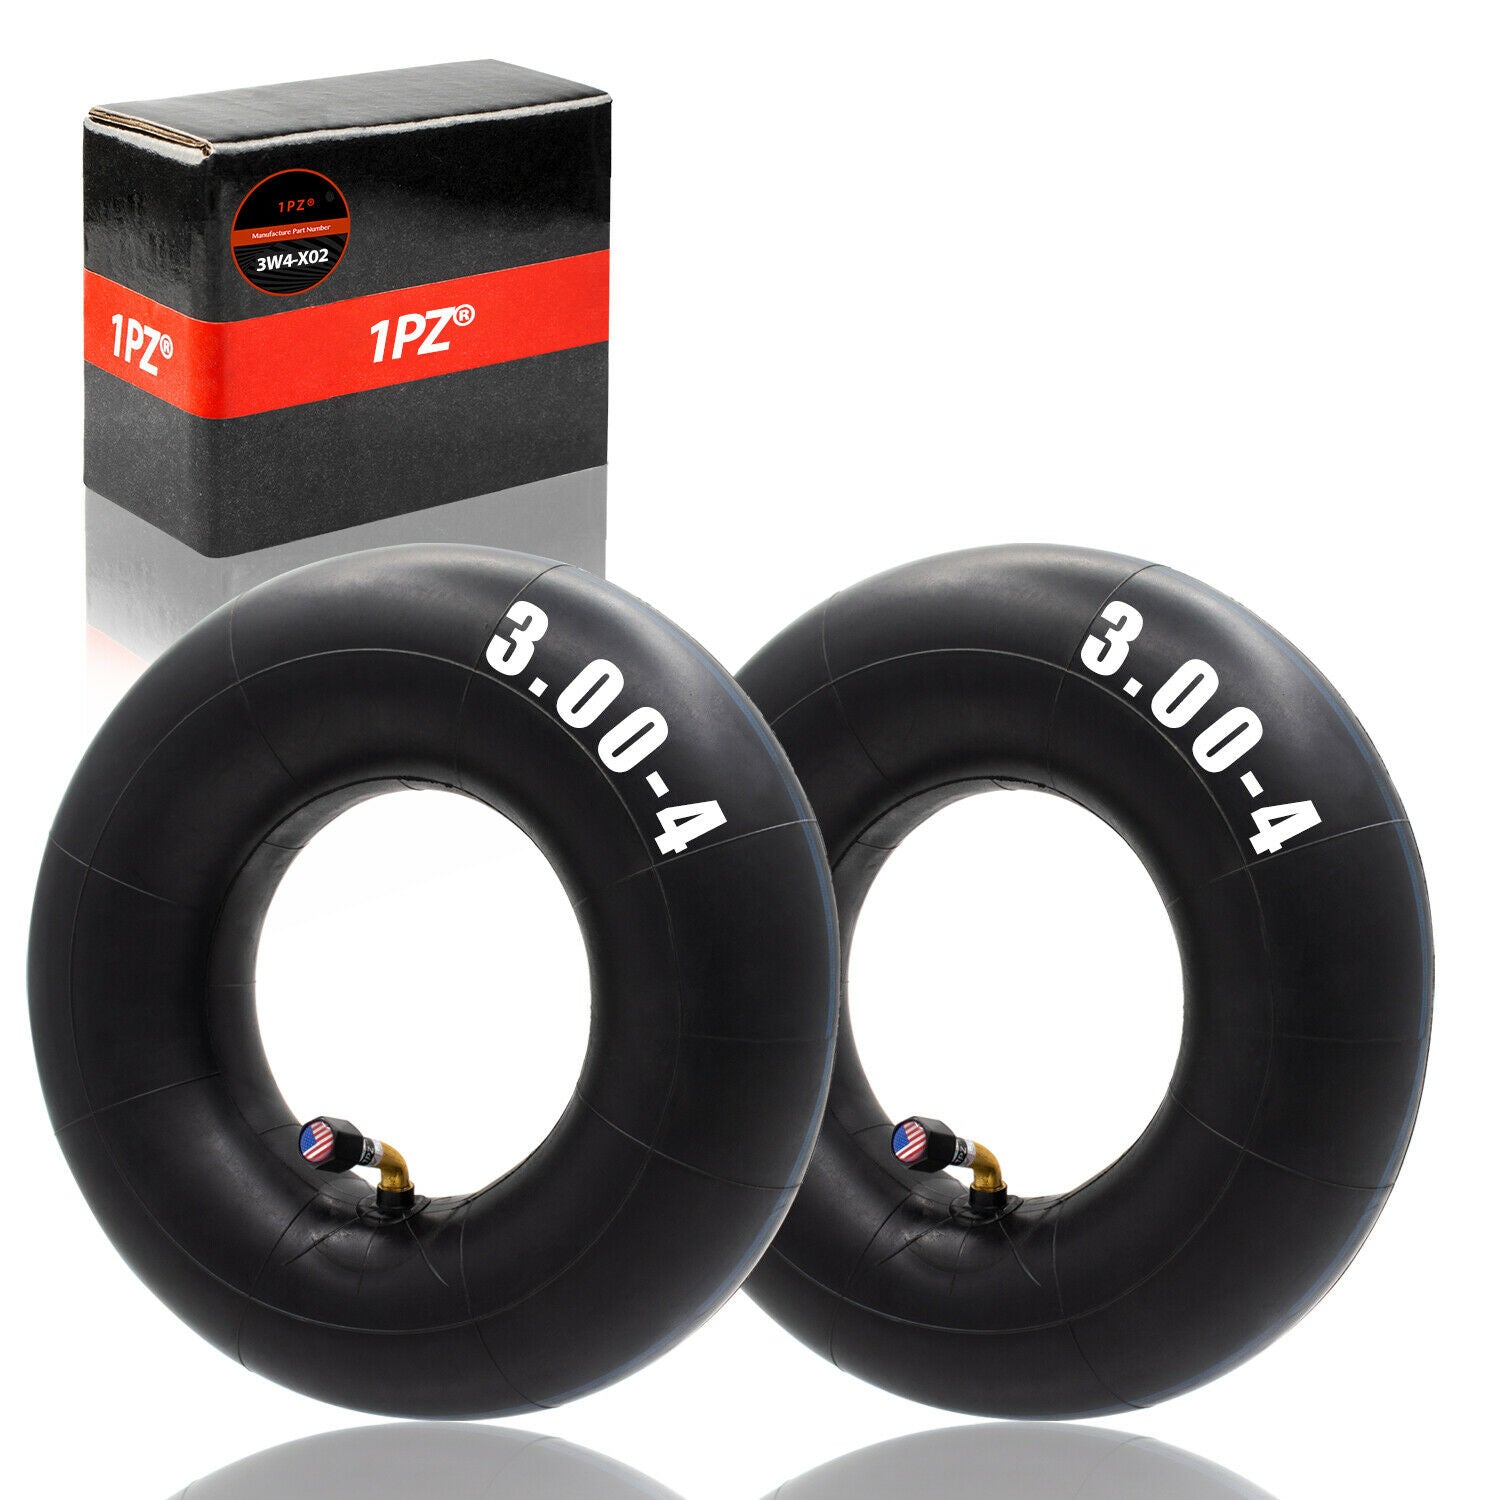 1PZ 3W4-X02 Heavy Duty 3.00-4 Inner Tube with TR87 bent Valve for